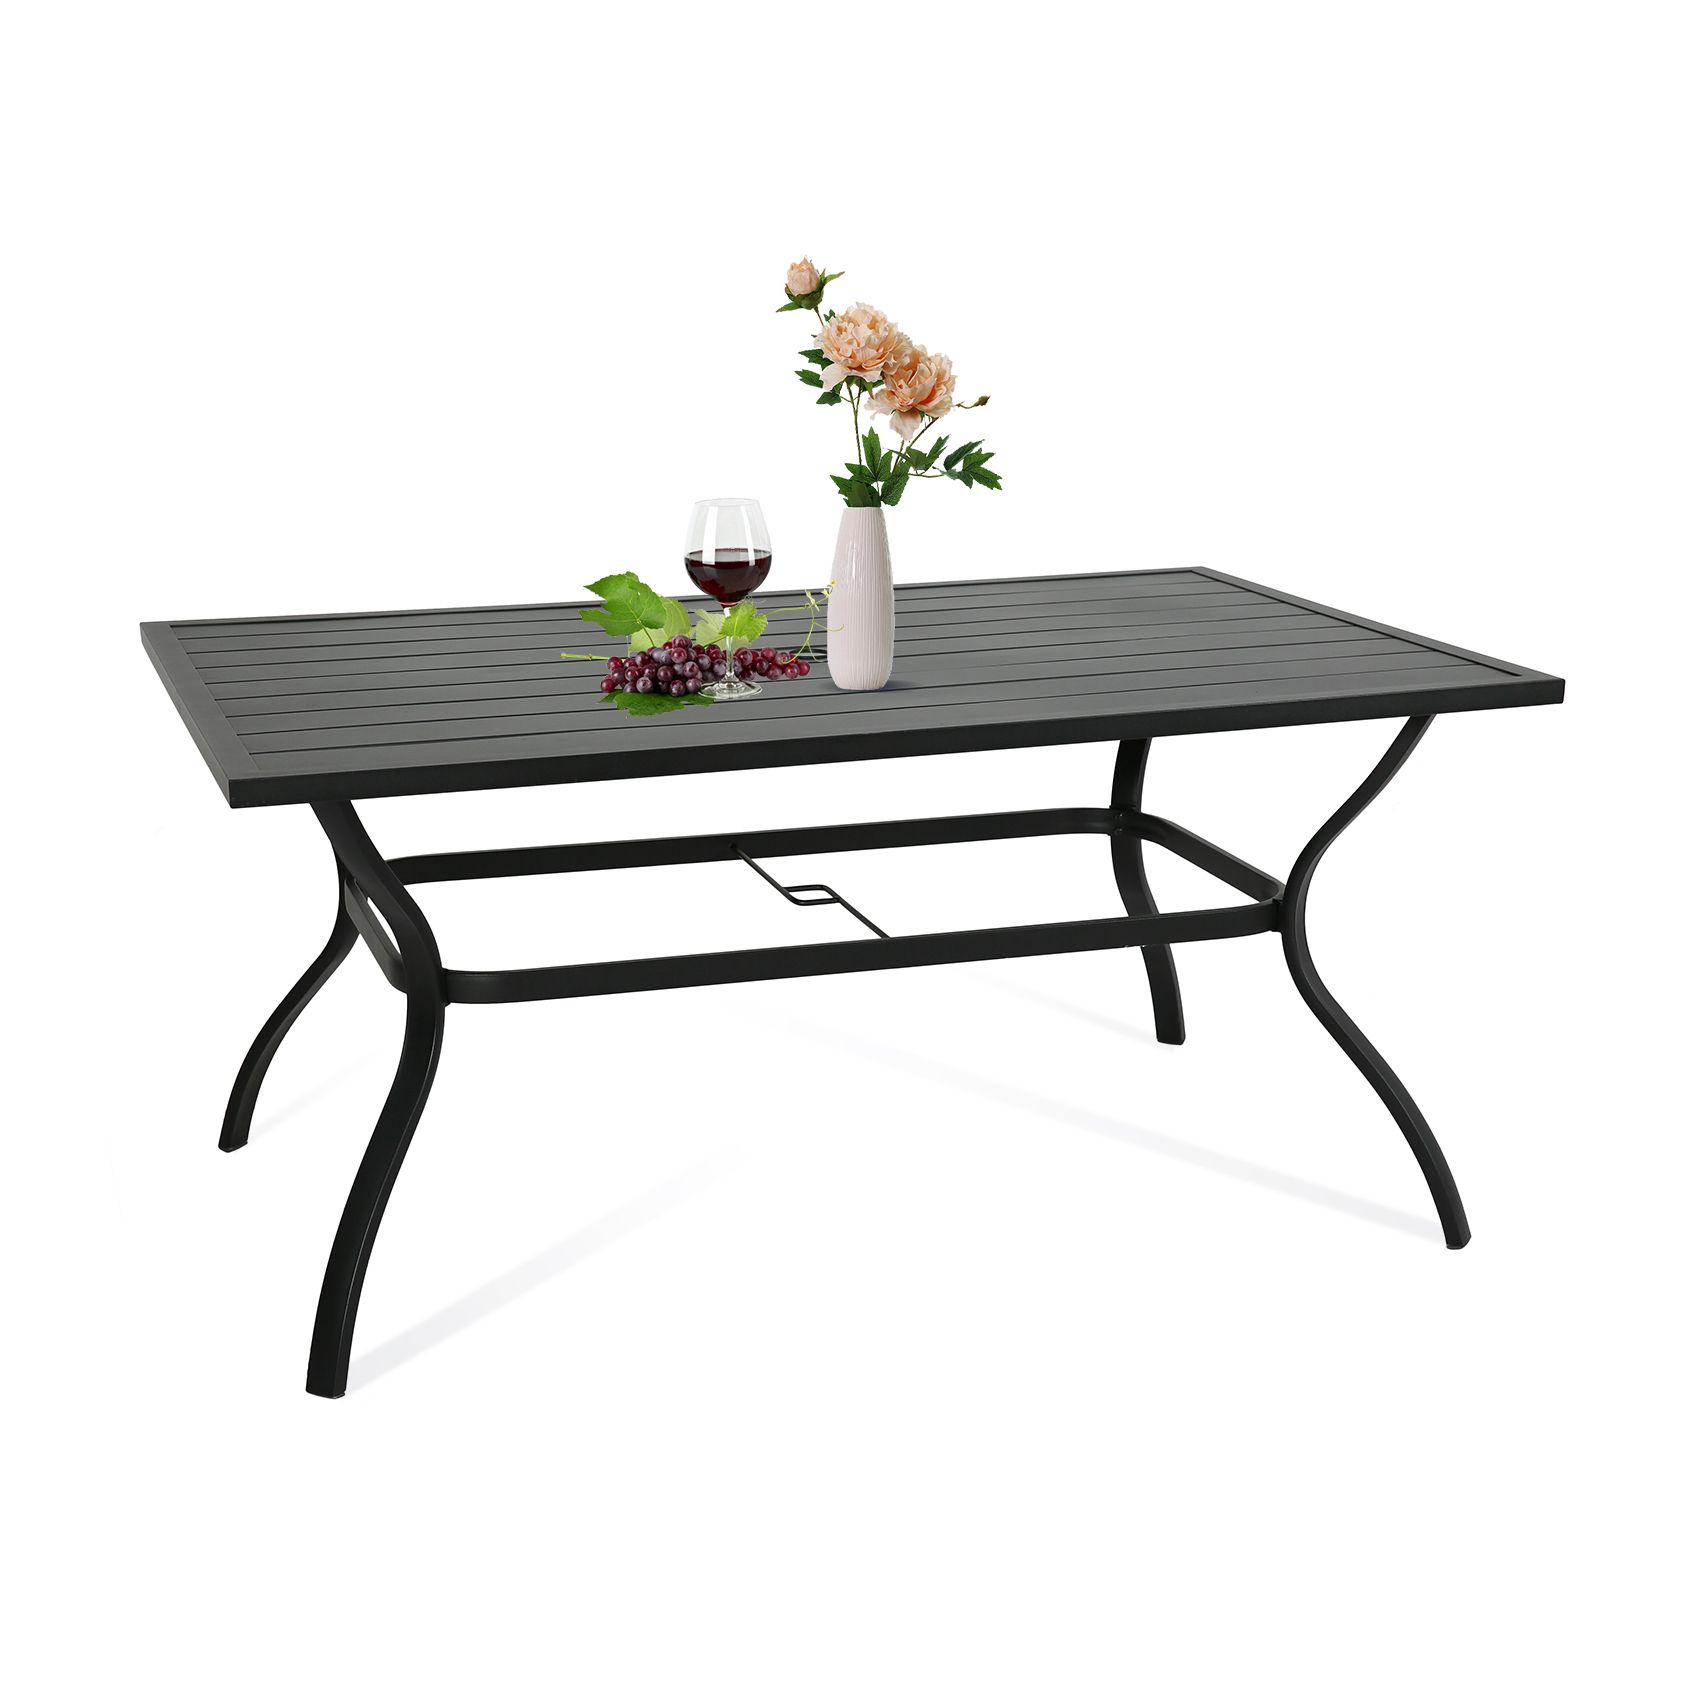 Rectangle Outdoor Tables Regarding Newest Ulax Furniture Outdoor Patio Rectangular Slatted Dining Table With Umbrella  Hole, Classic Black – Walmart (View 13 of 15)